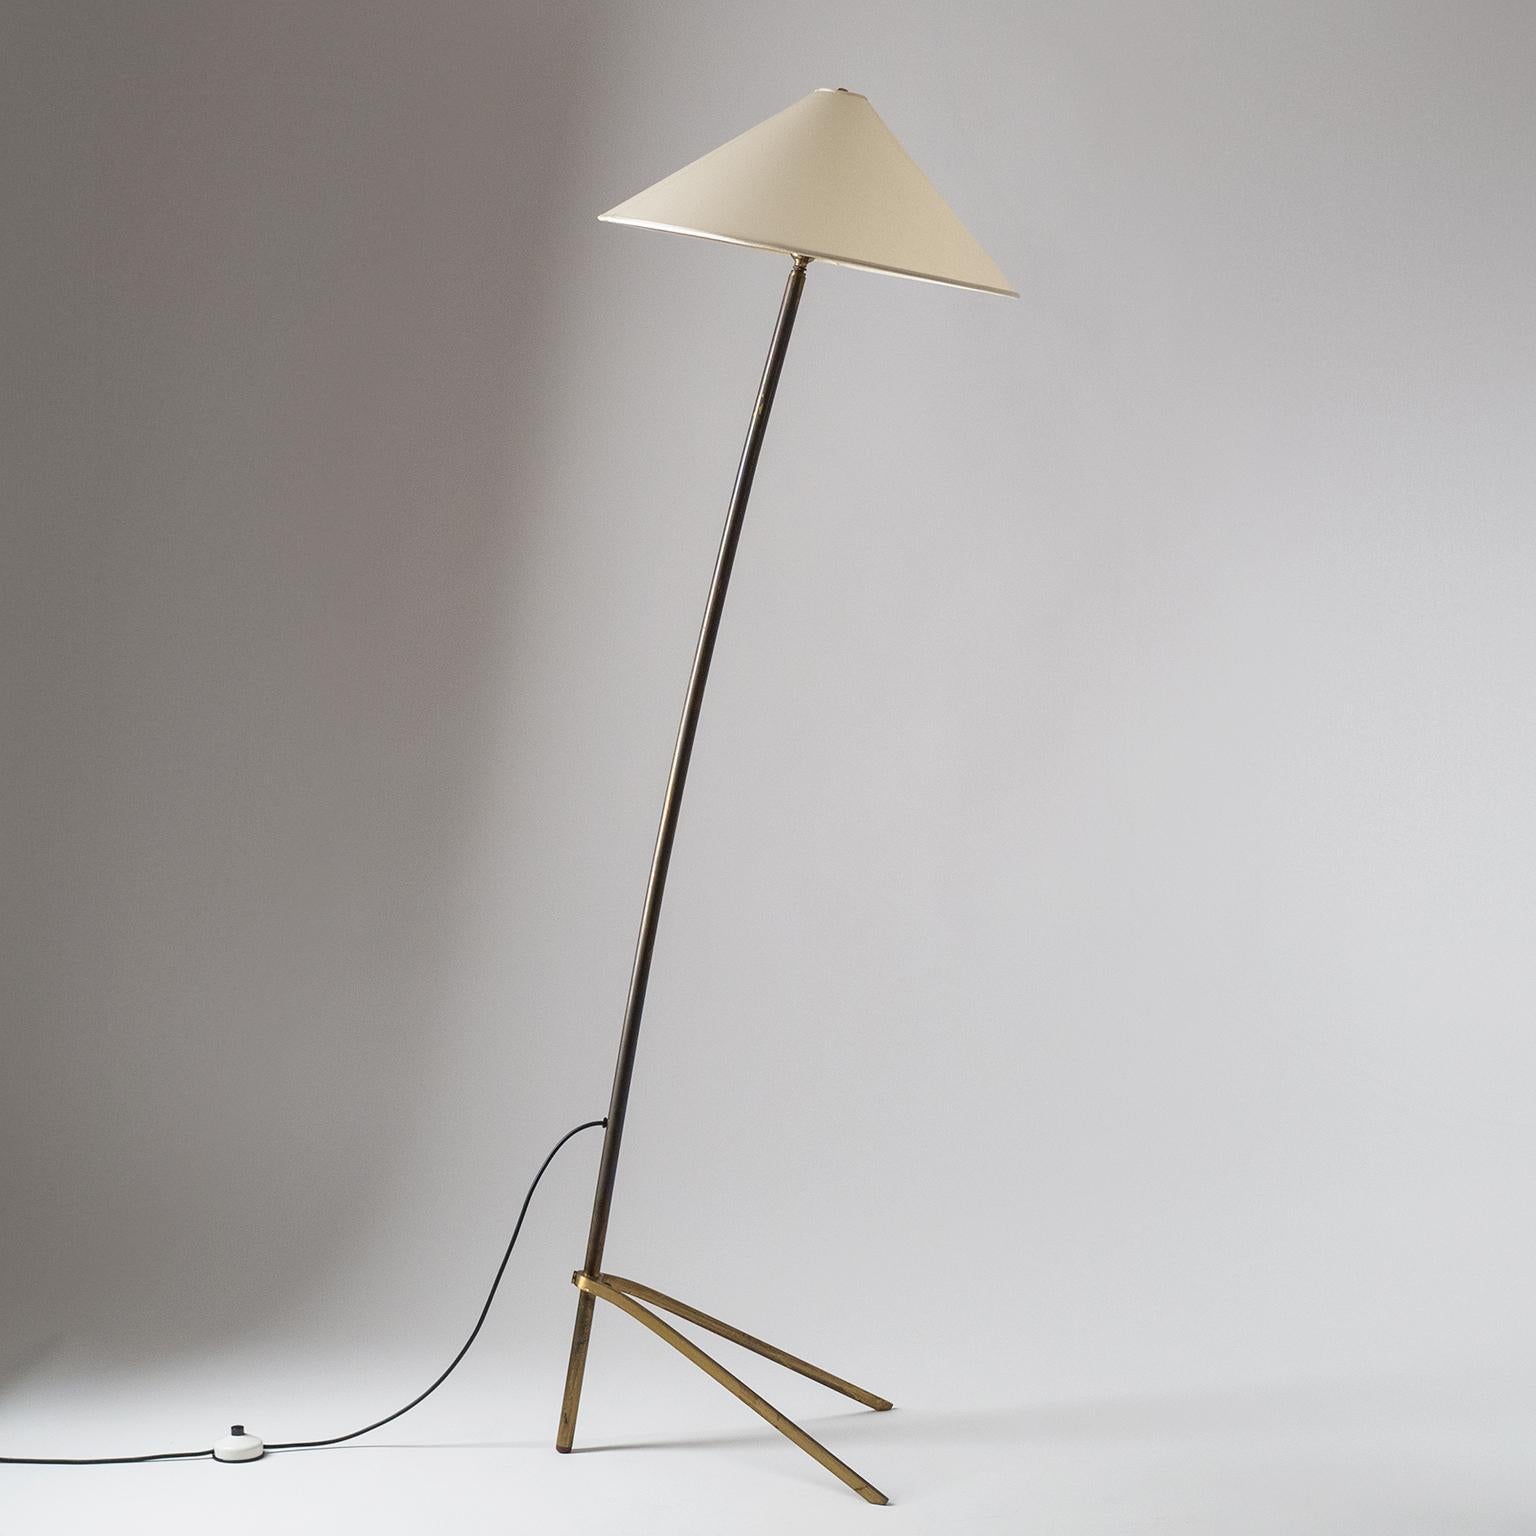 Minimalist brass floor lamp, circa 1950. Elegant arching brass stem with tripod base. The original shade has new parchment covering and can pivot for different lighting effects. One original brass E27 socket with new wiring.